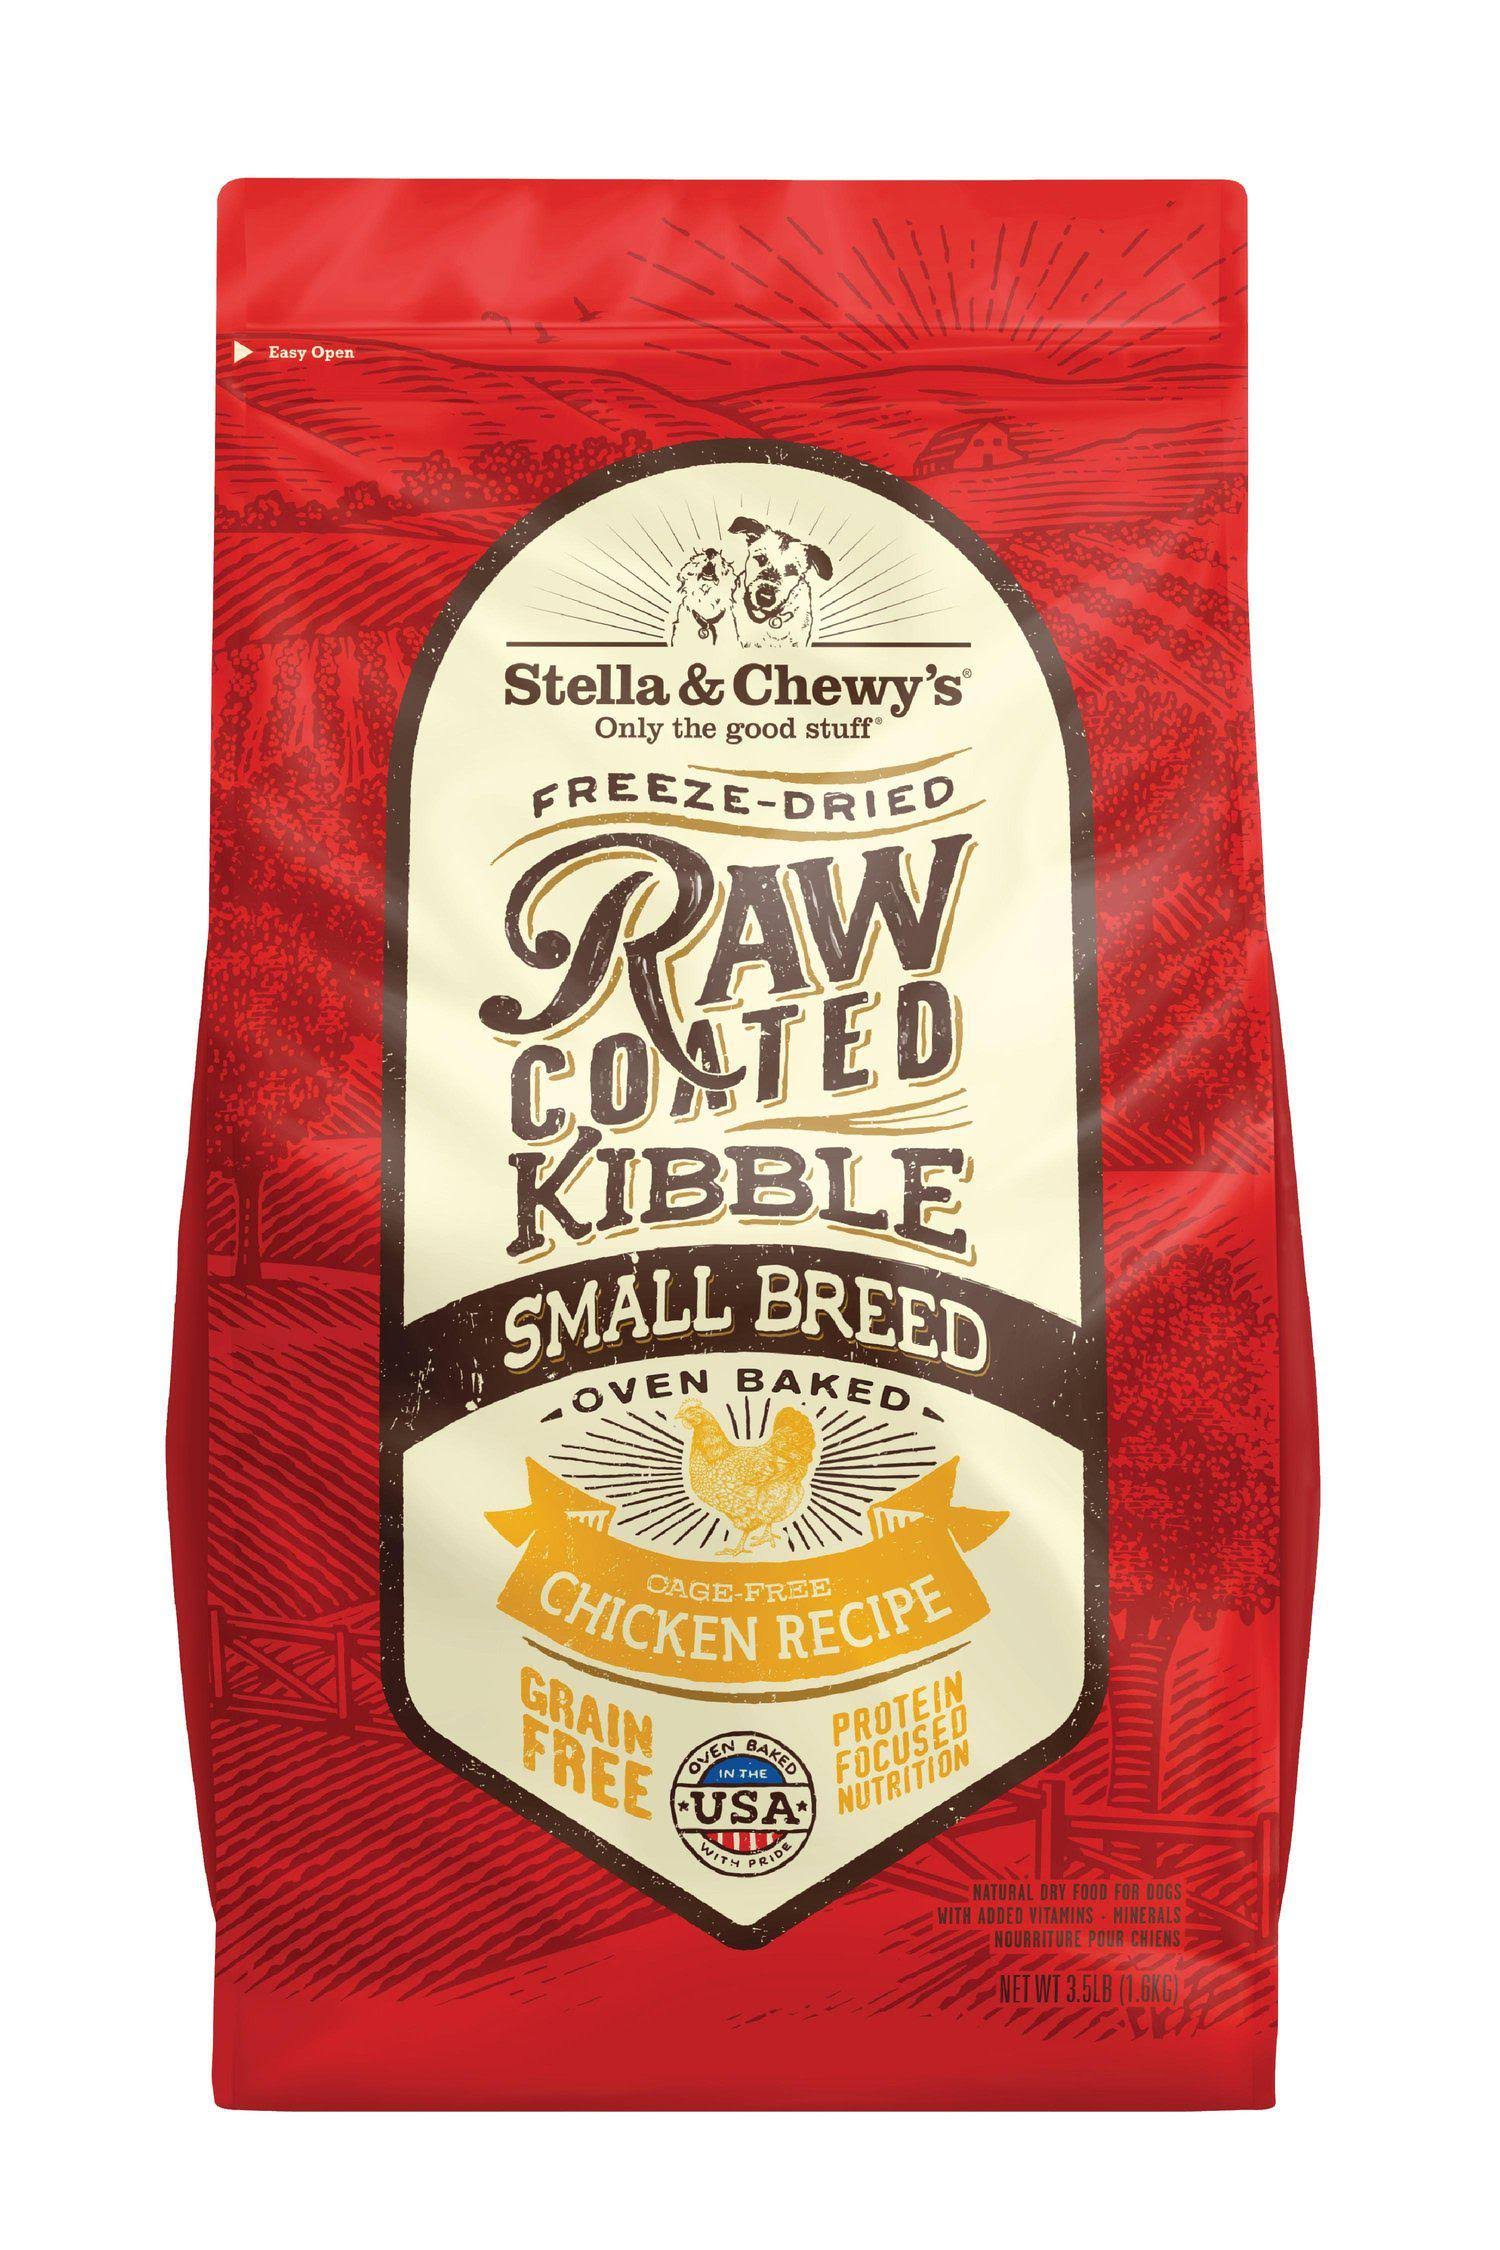 Stella & Chewy's Chicken Raw Coated Small Breed Dog Food, 10 lb